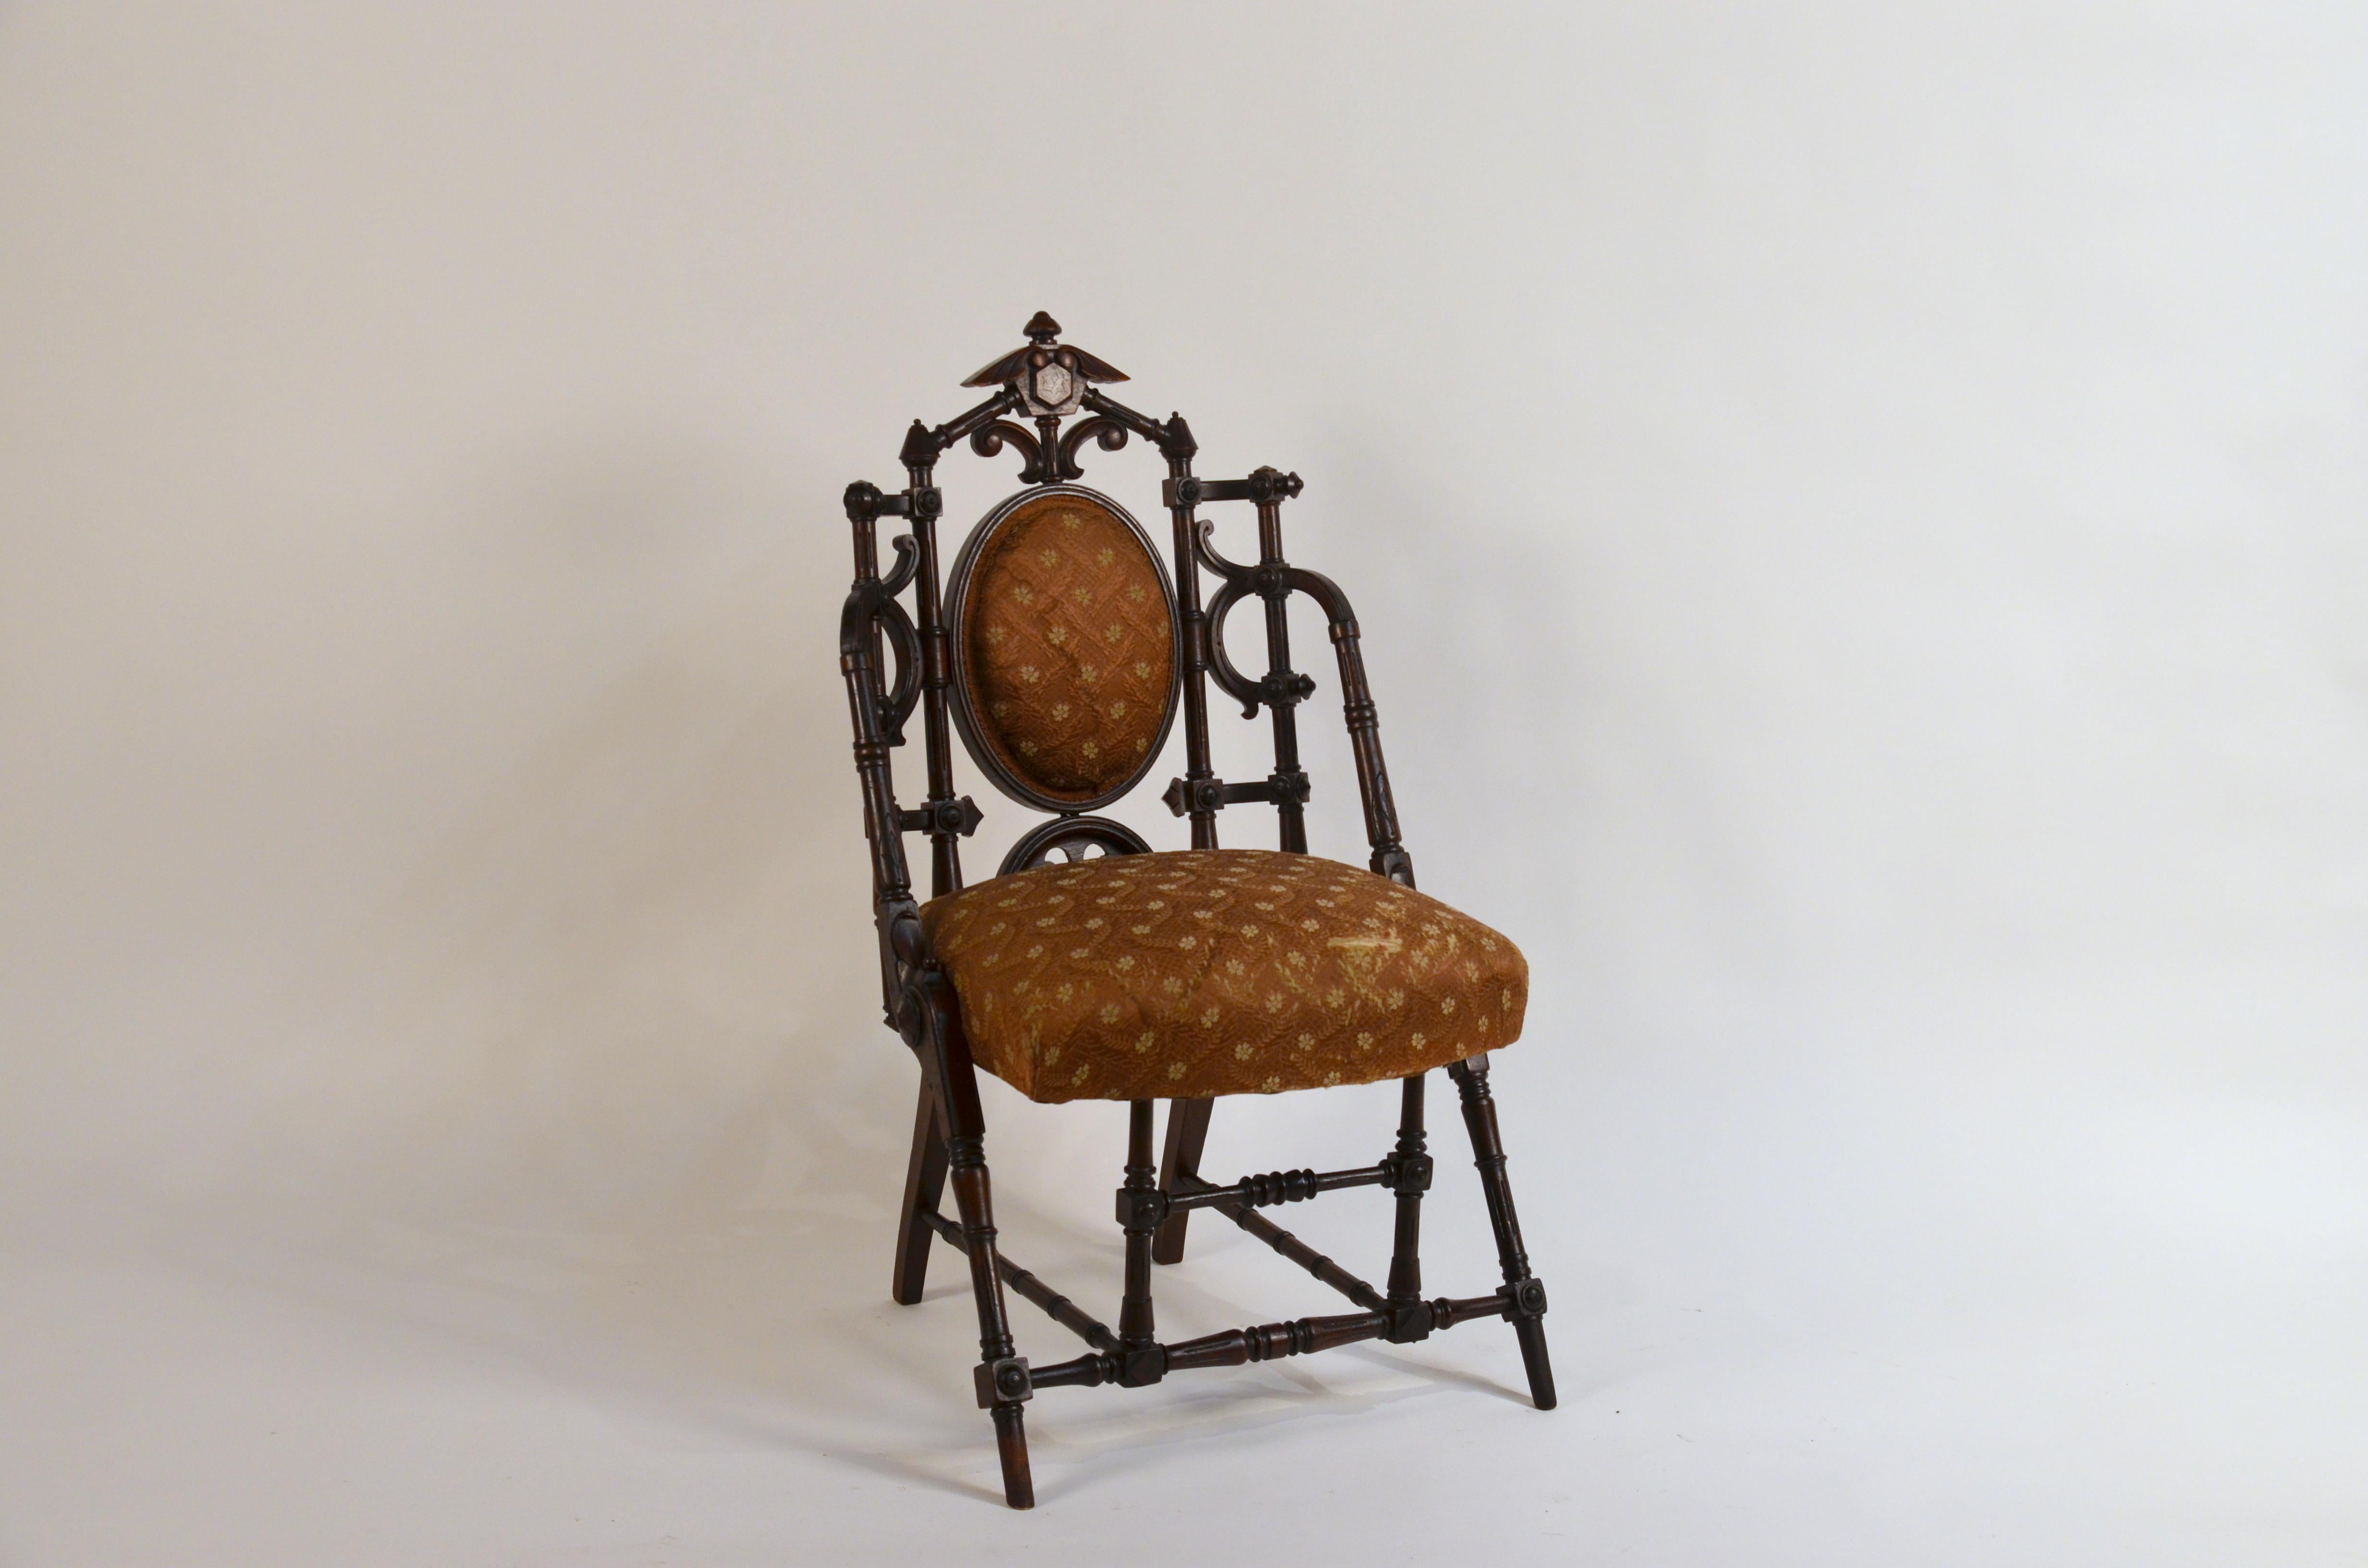 Exceptional turned walnut side chair by George Hunzinger. Stamped HUNZINGER, N. Y.

That George Hunzinger (1835-98) is not a household name like Michael Thonet or even Charles Eames, owes as much to the vagaries of fashion as to any shortcomings